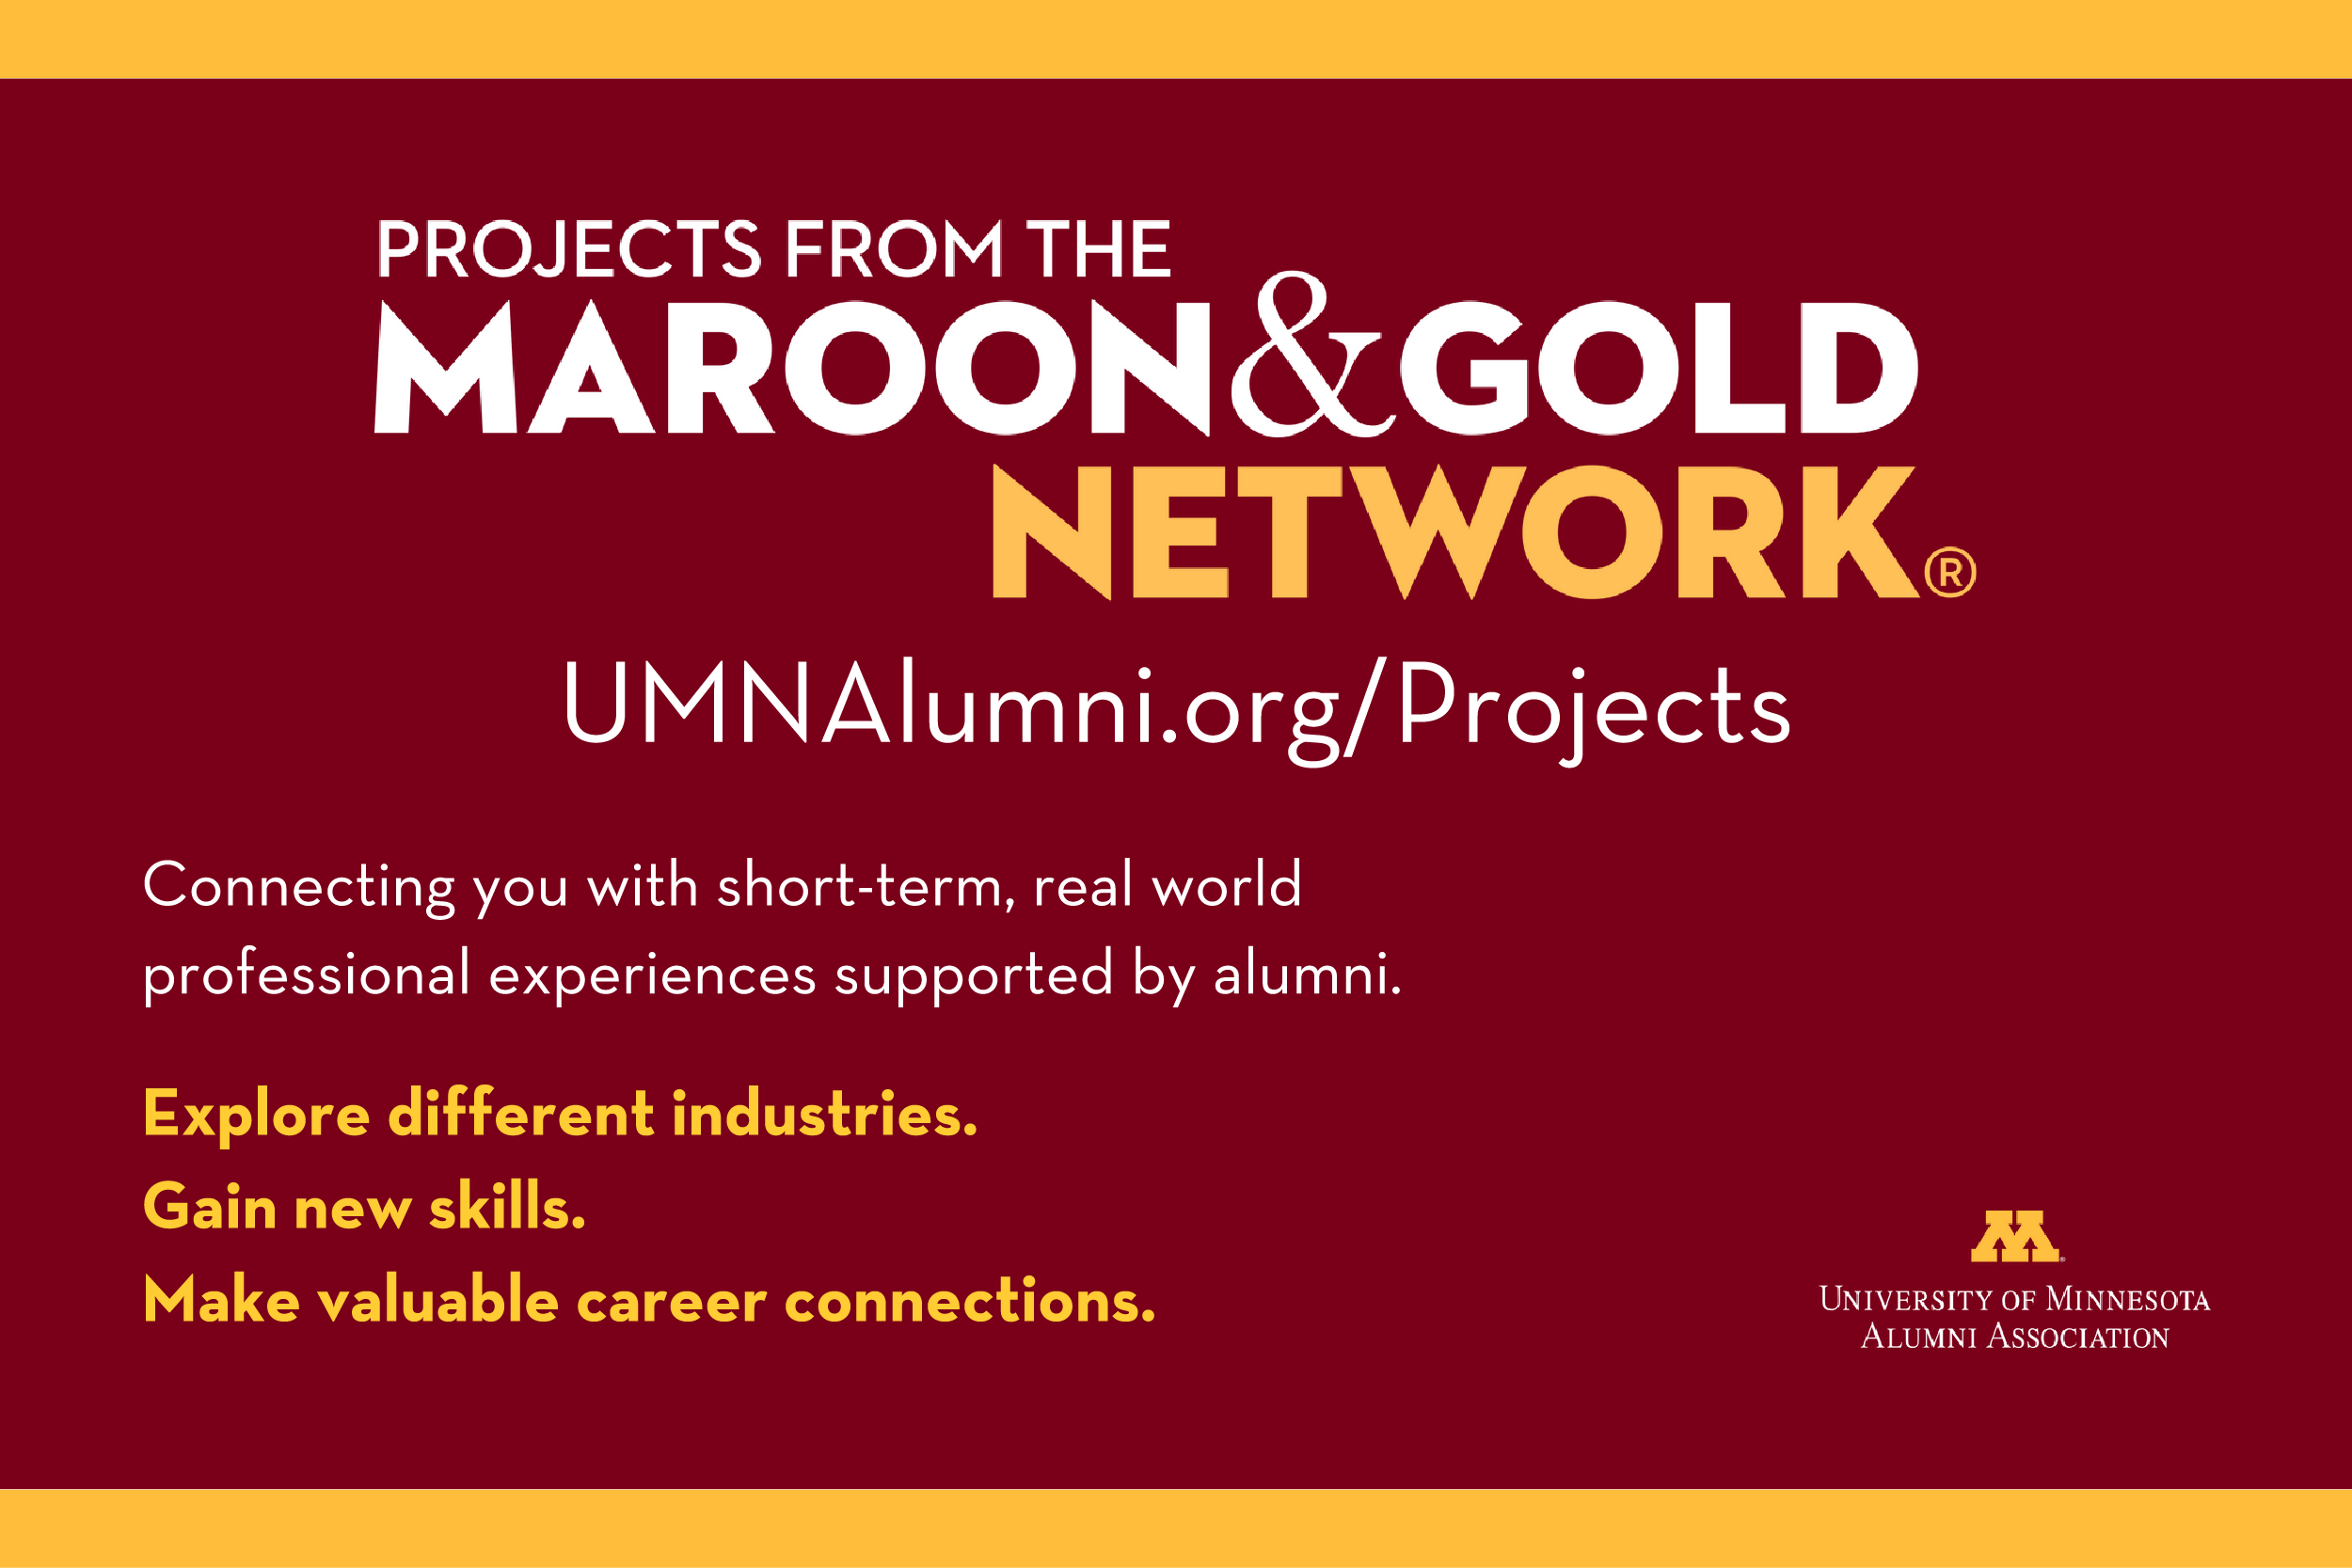 maroon and gold network projects